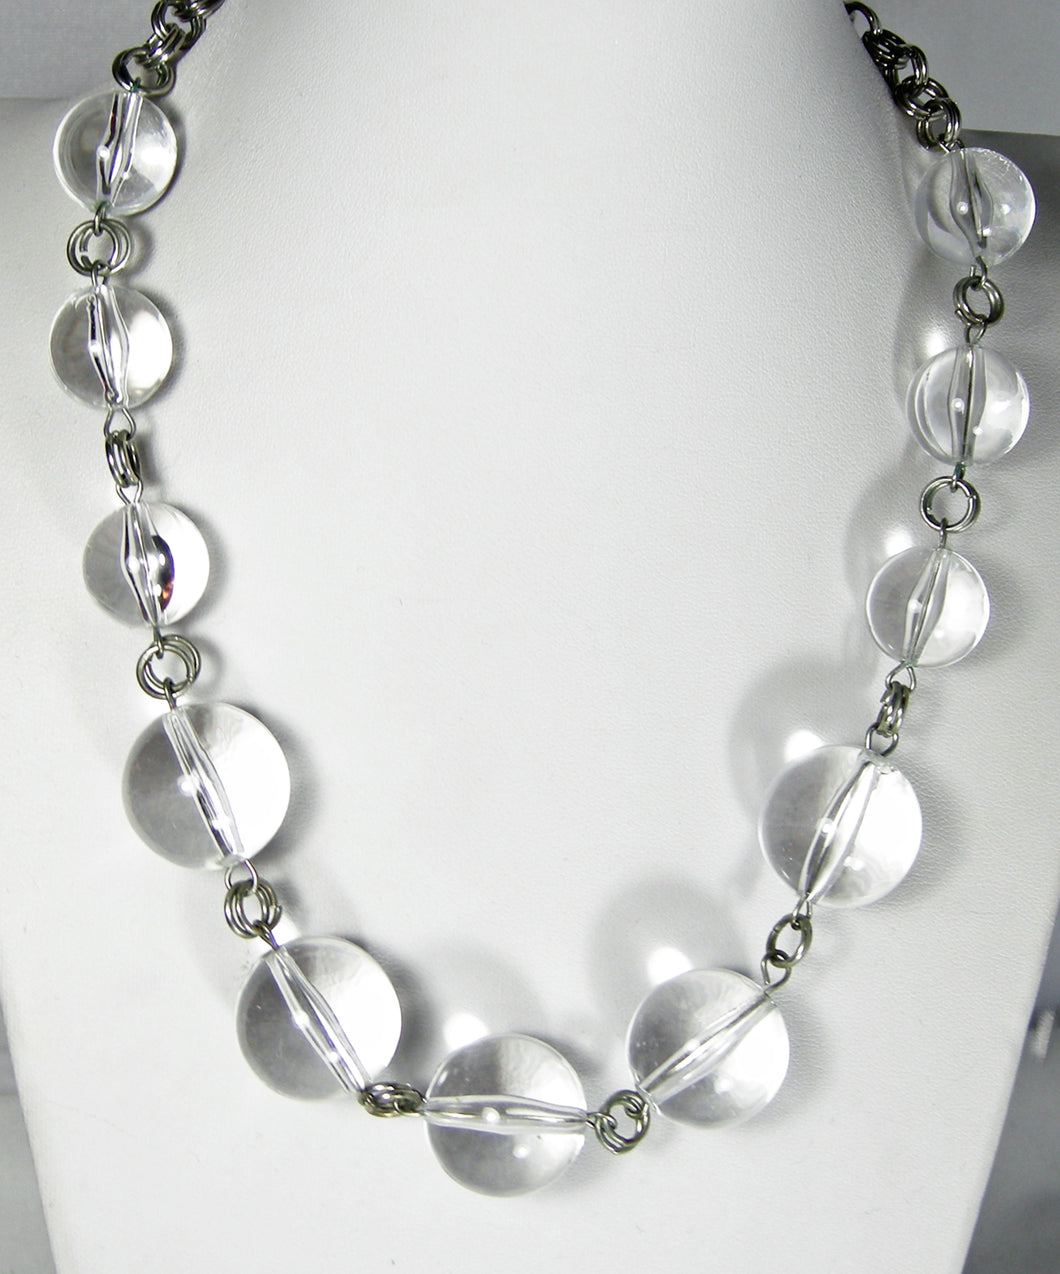 Vintage Lucite Ball Necklace